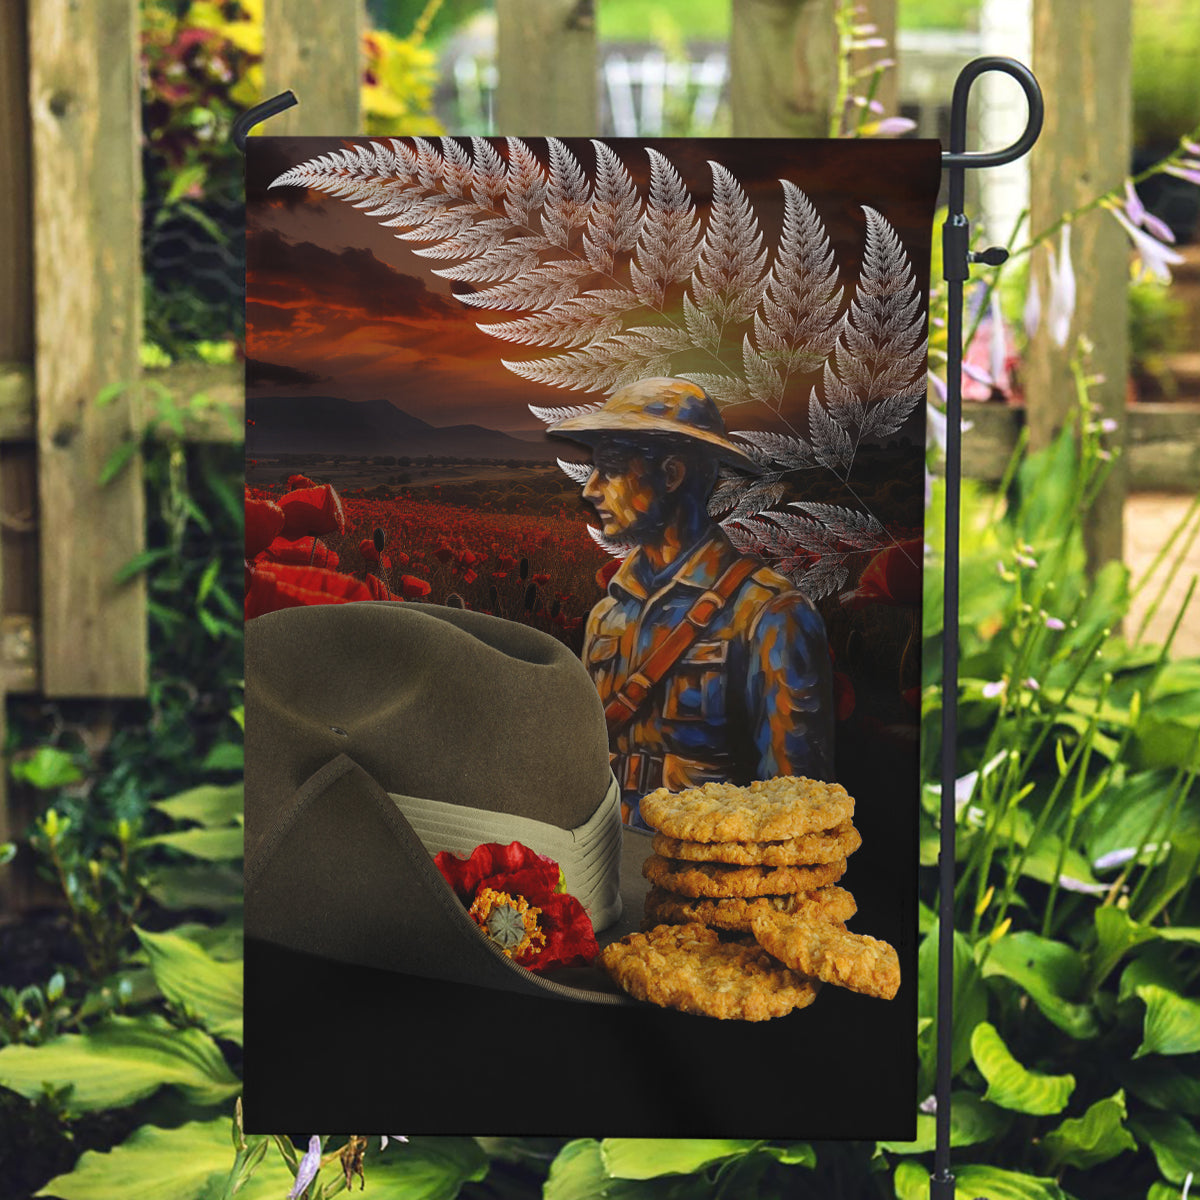 Slouch Hat and Biscuits ANZAC Garden Flag with Soldier Silver Fern LT03 Garden Flag Black - Polynesian Pride